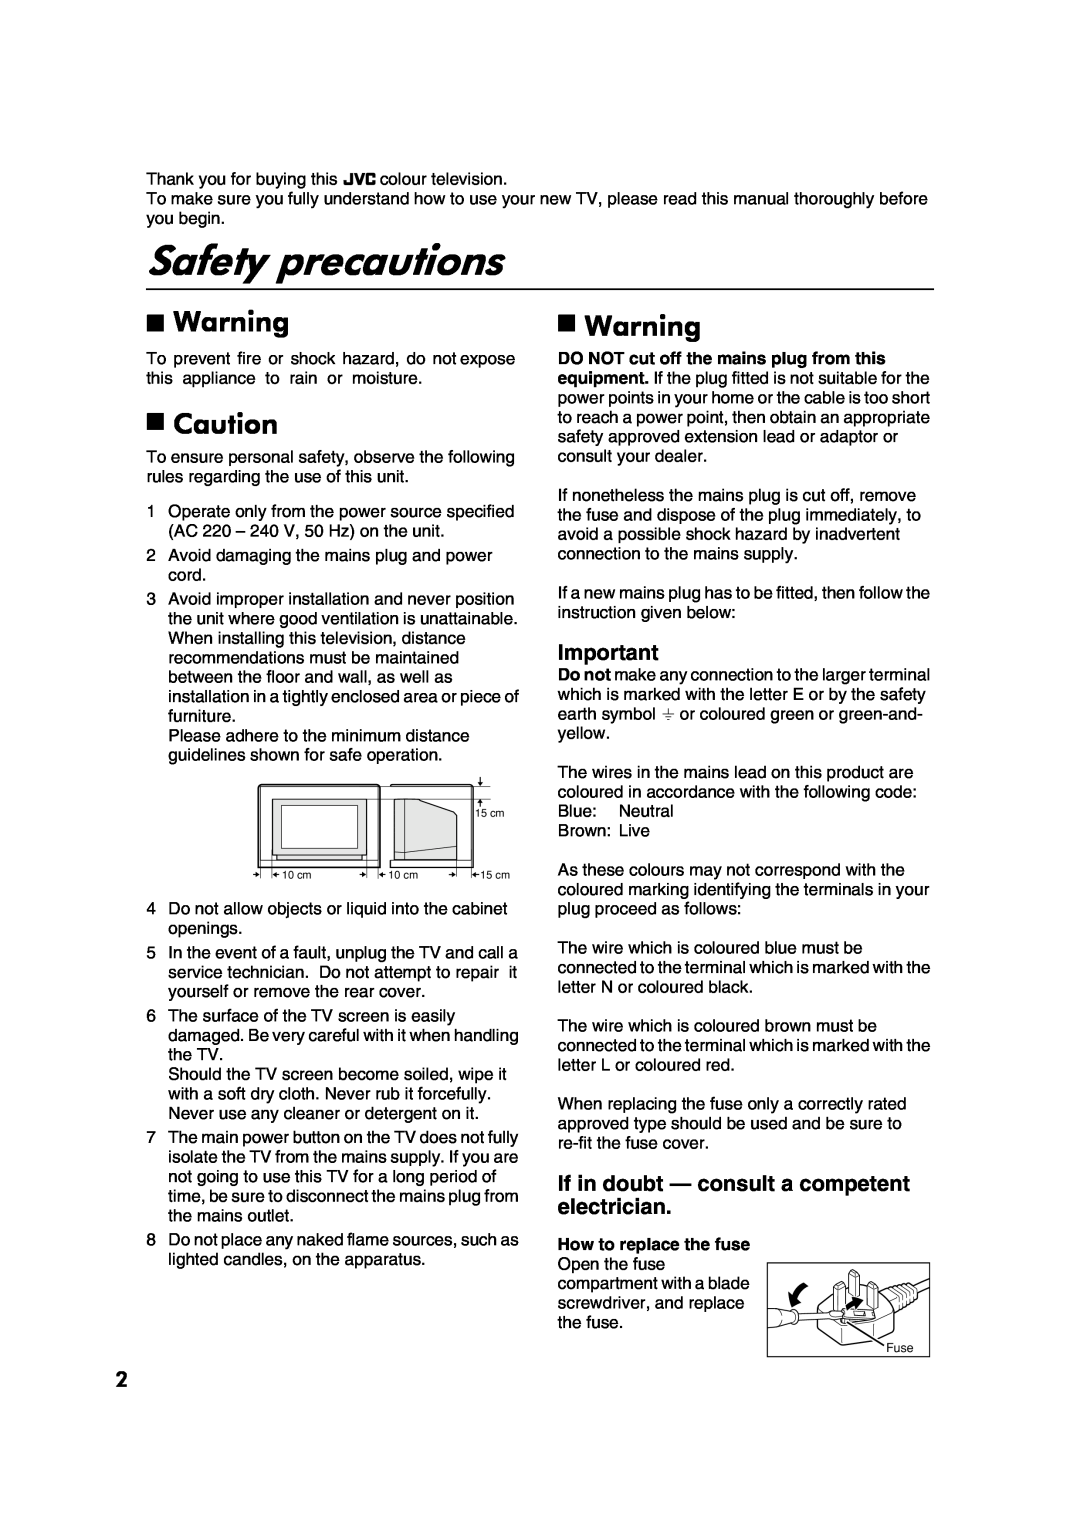 JVC AV28CT1EK, AV28CT1EI specifications Safety precautions, If in doubt - consult a competent electrician 